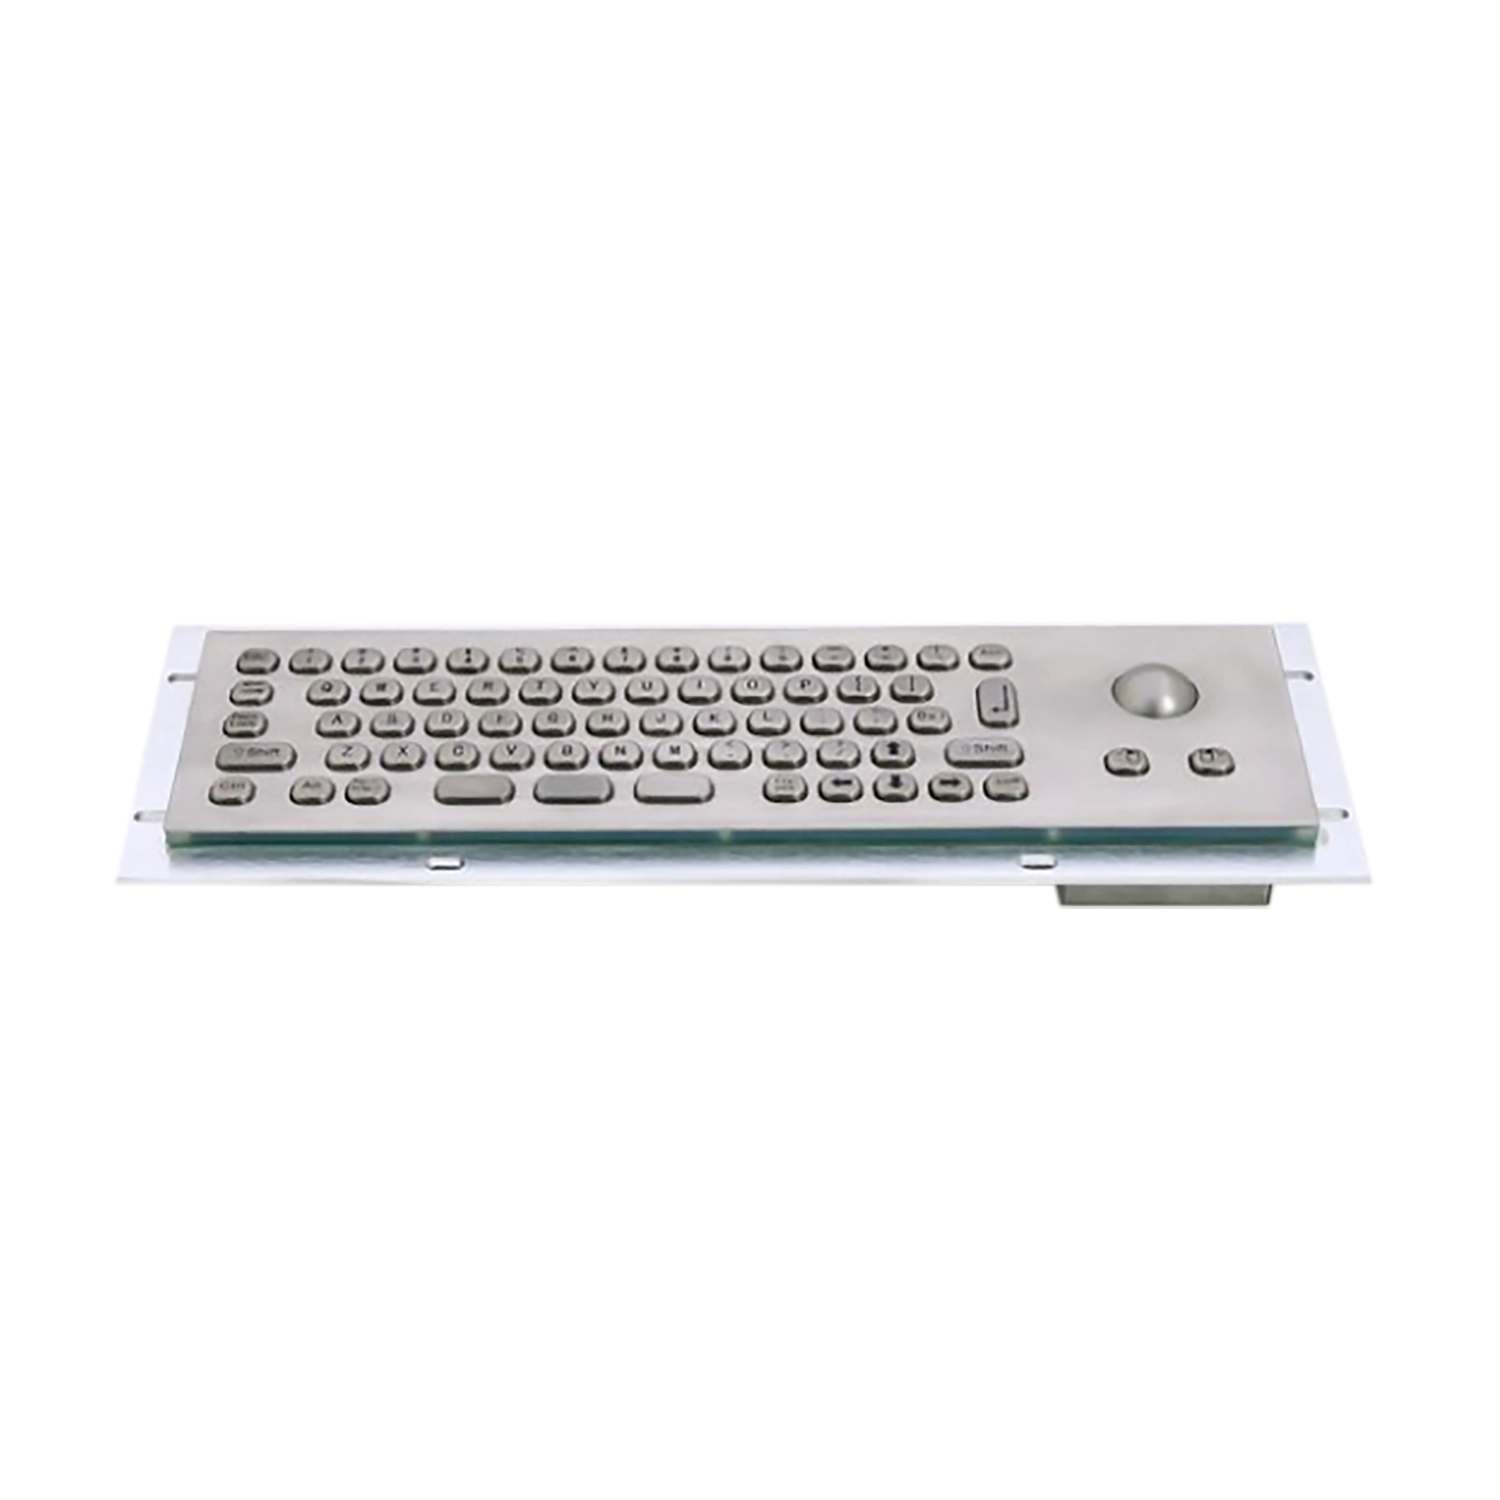 Rugged panel mount keyboard with trackball KB-000-NW0S0T9 MINI